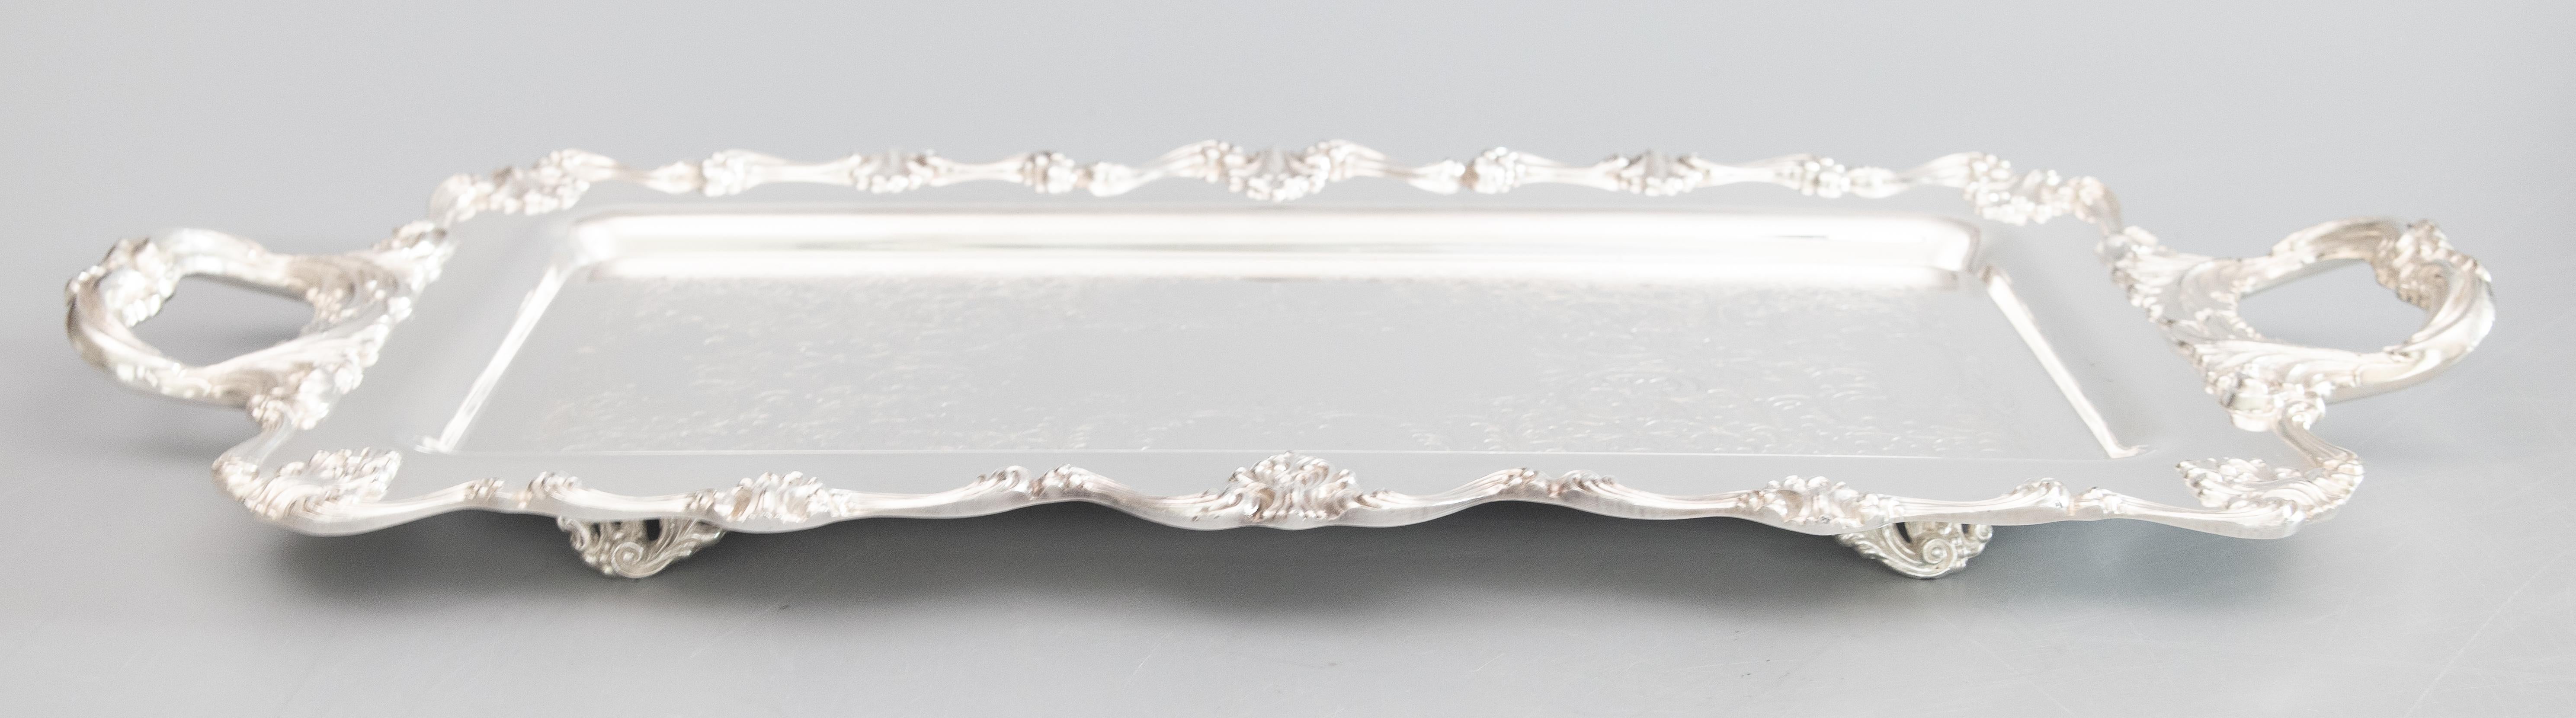 American 1930s Silver Plate Oblong Footed Tray With Handles by W&S Blackinton 